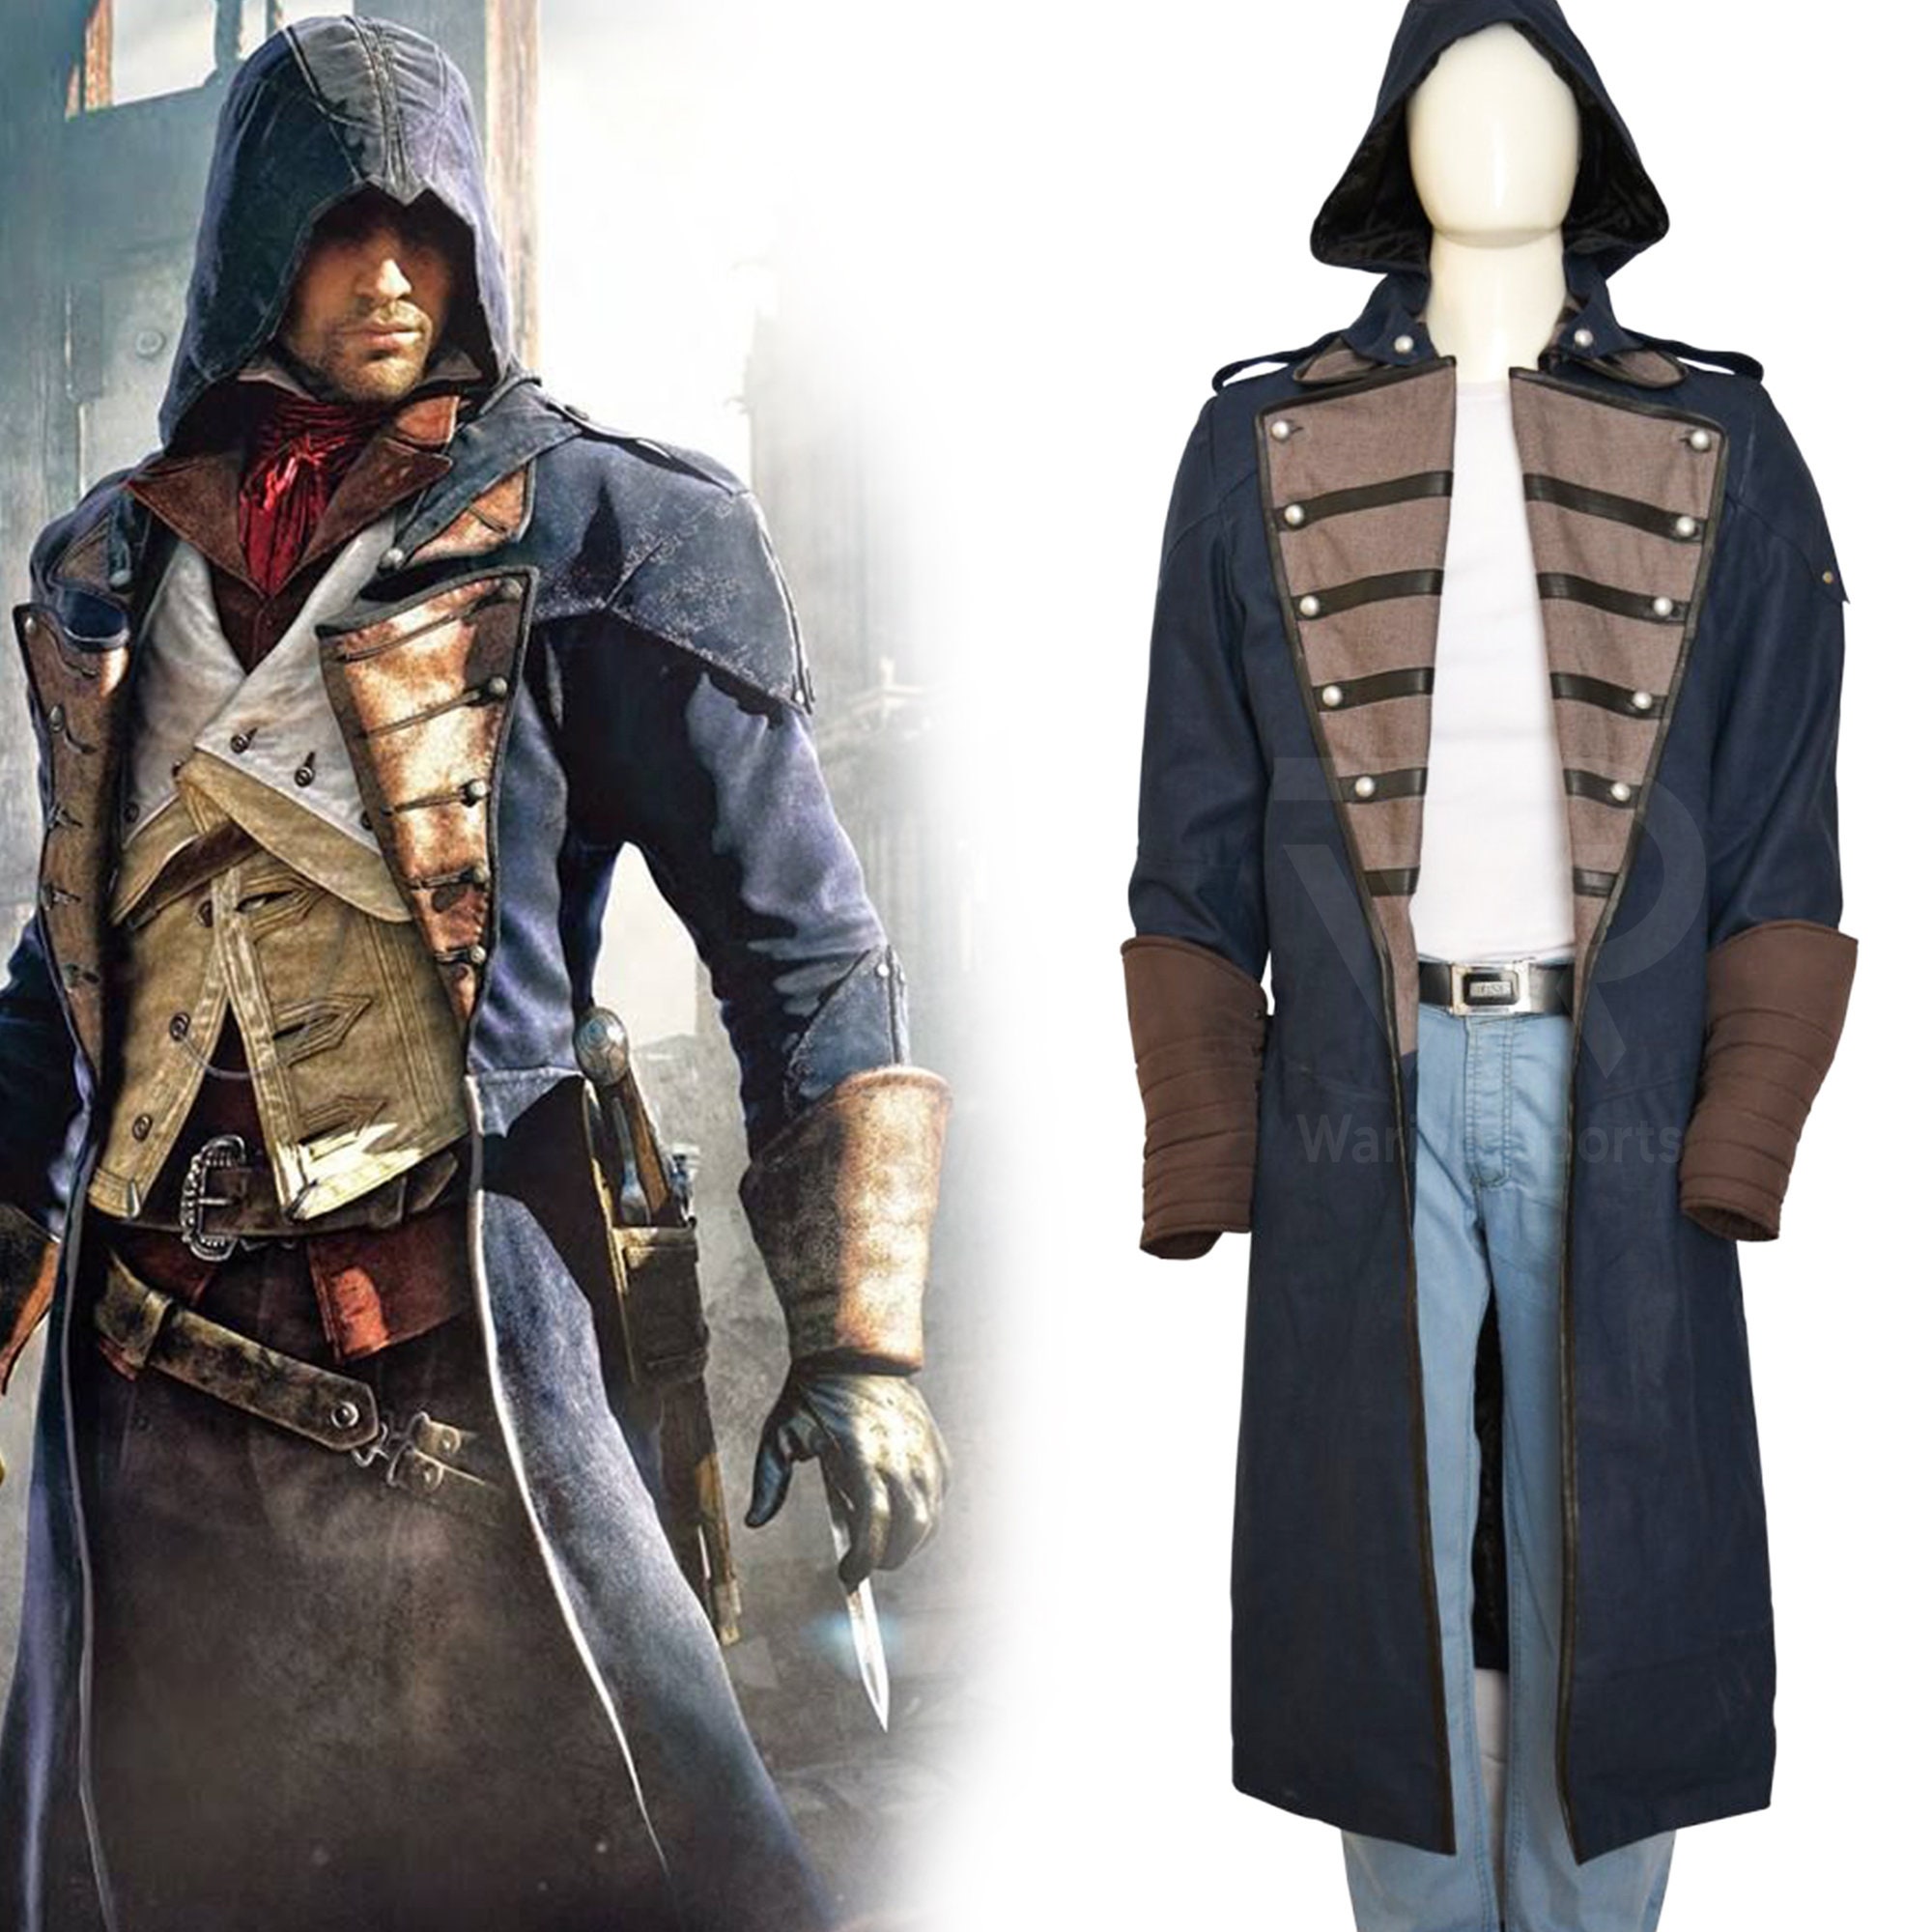 AC3 all Champion pack costumes  Assassin's Creed 3 Multiplayer